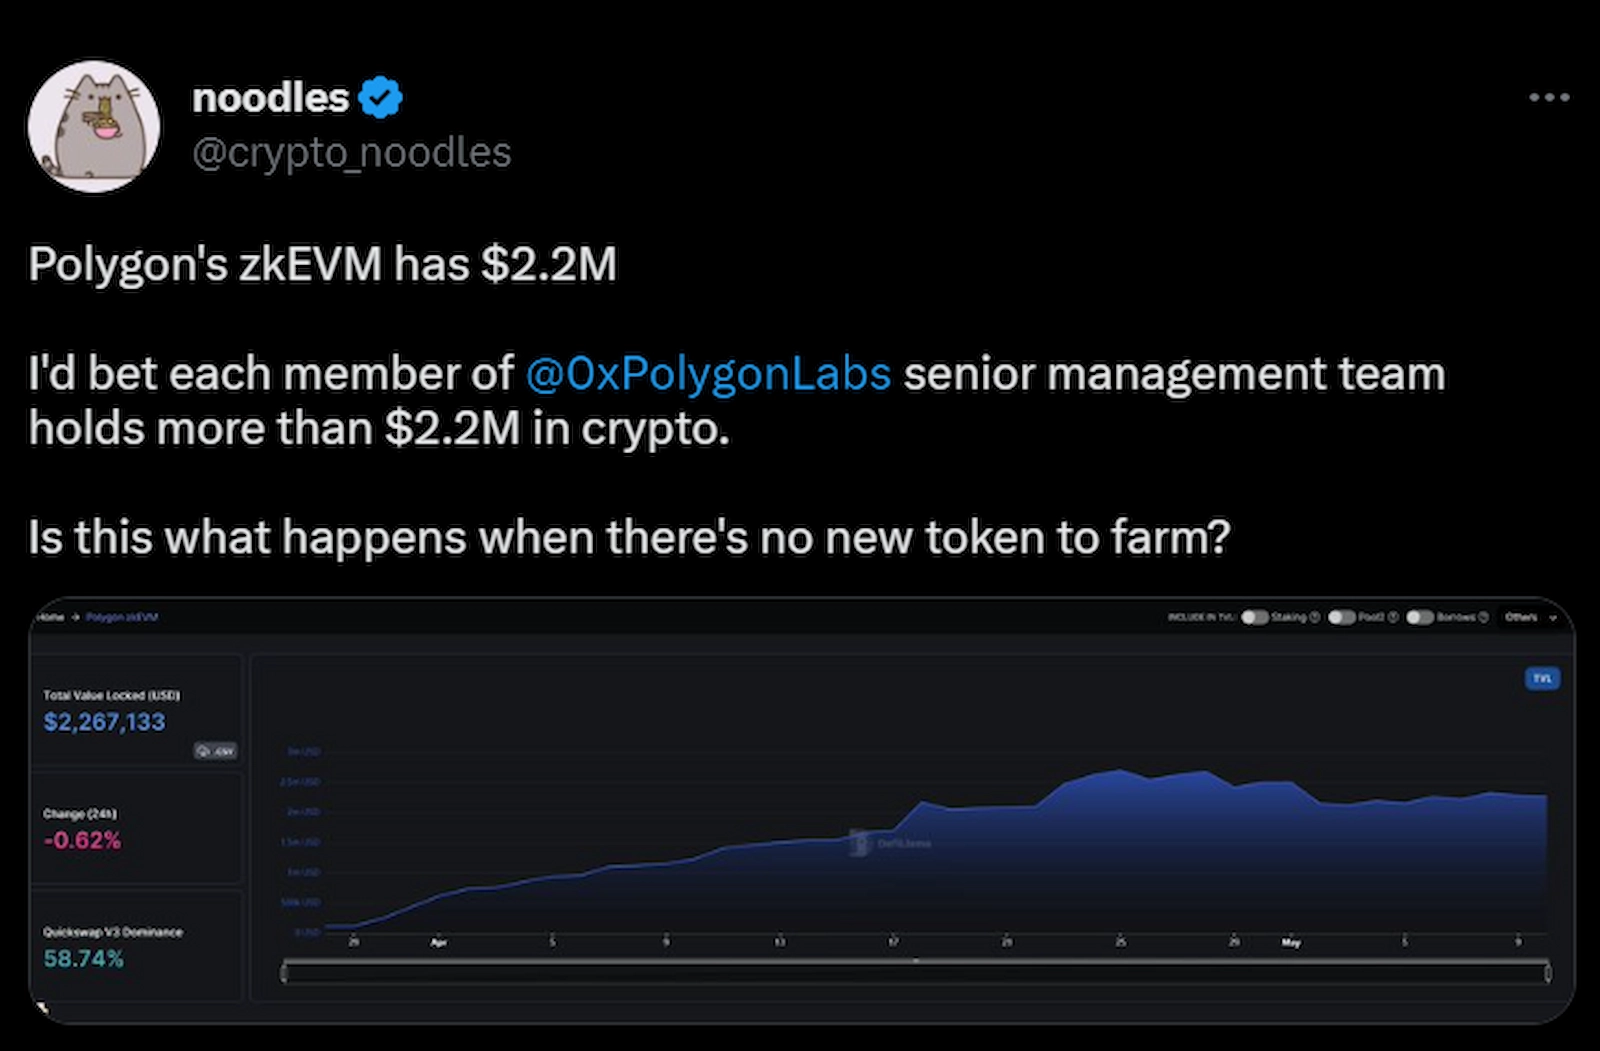 Twitter user 'noodles' questioned Polygon zkEVM's slow TVL growth